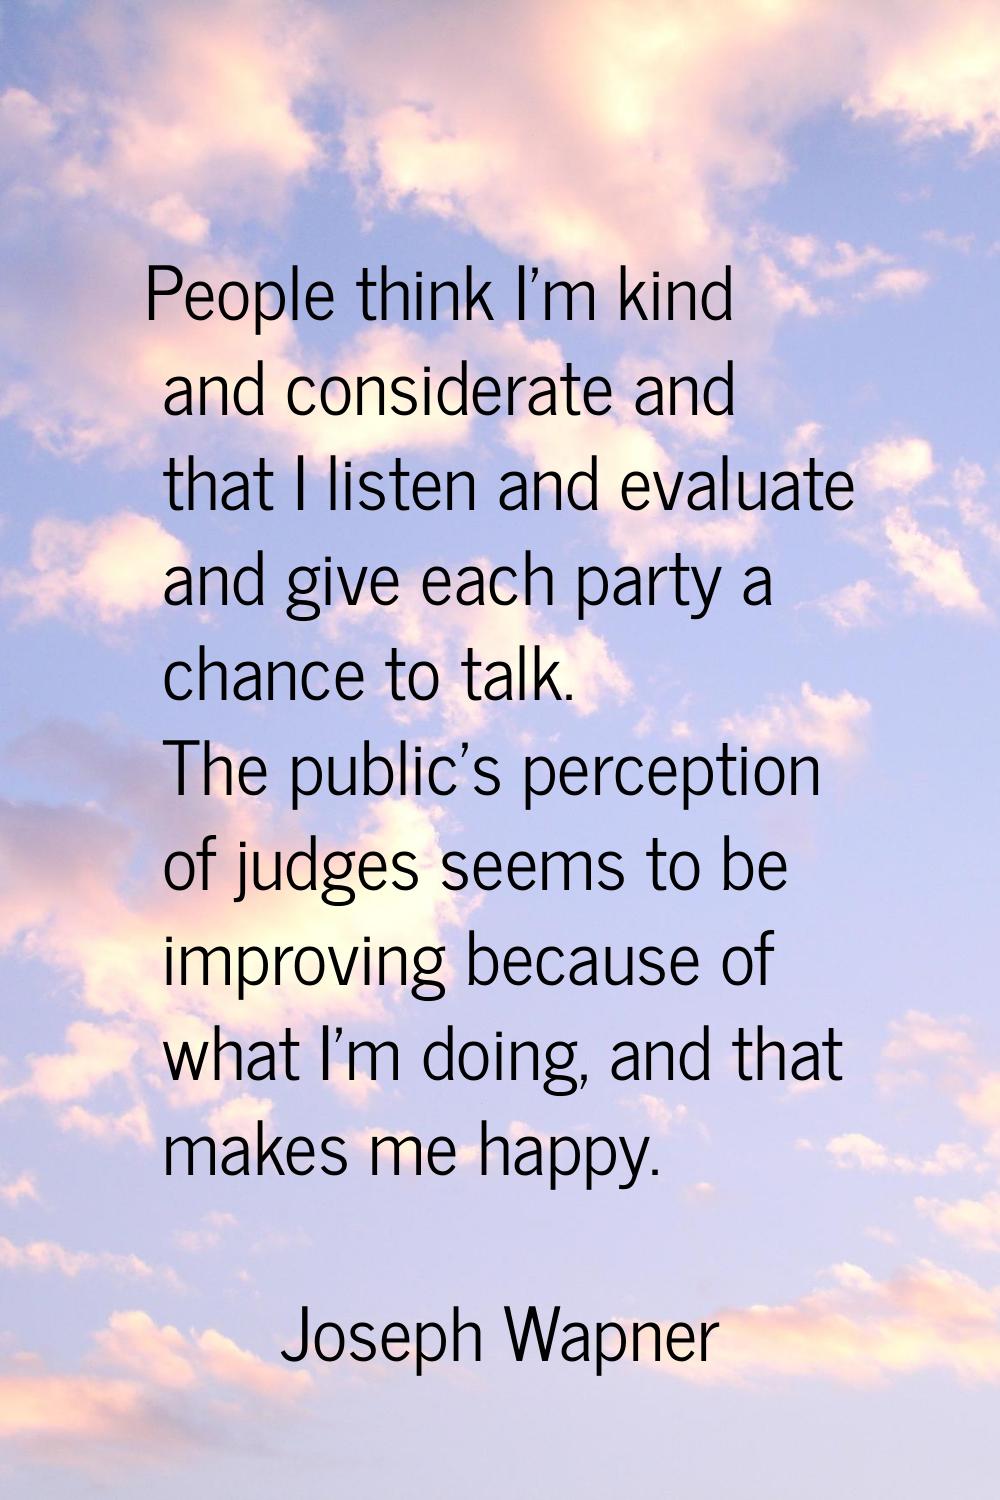 People think I'm kind and considerate and that I listen and evaluate and give each party a chance t